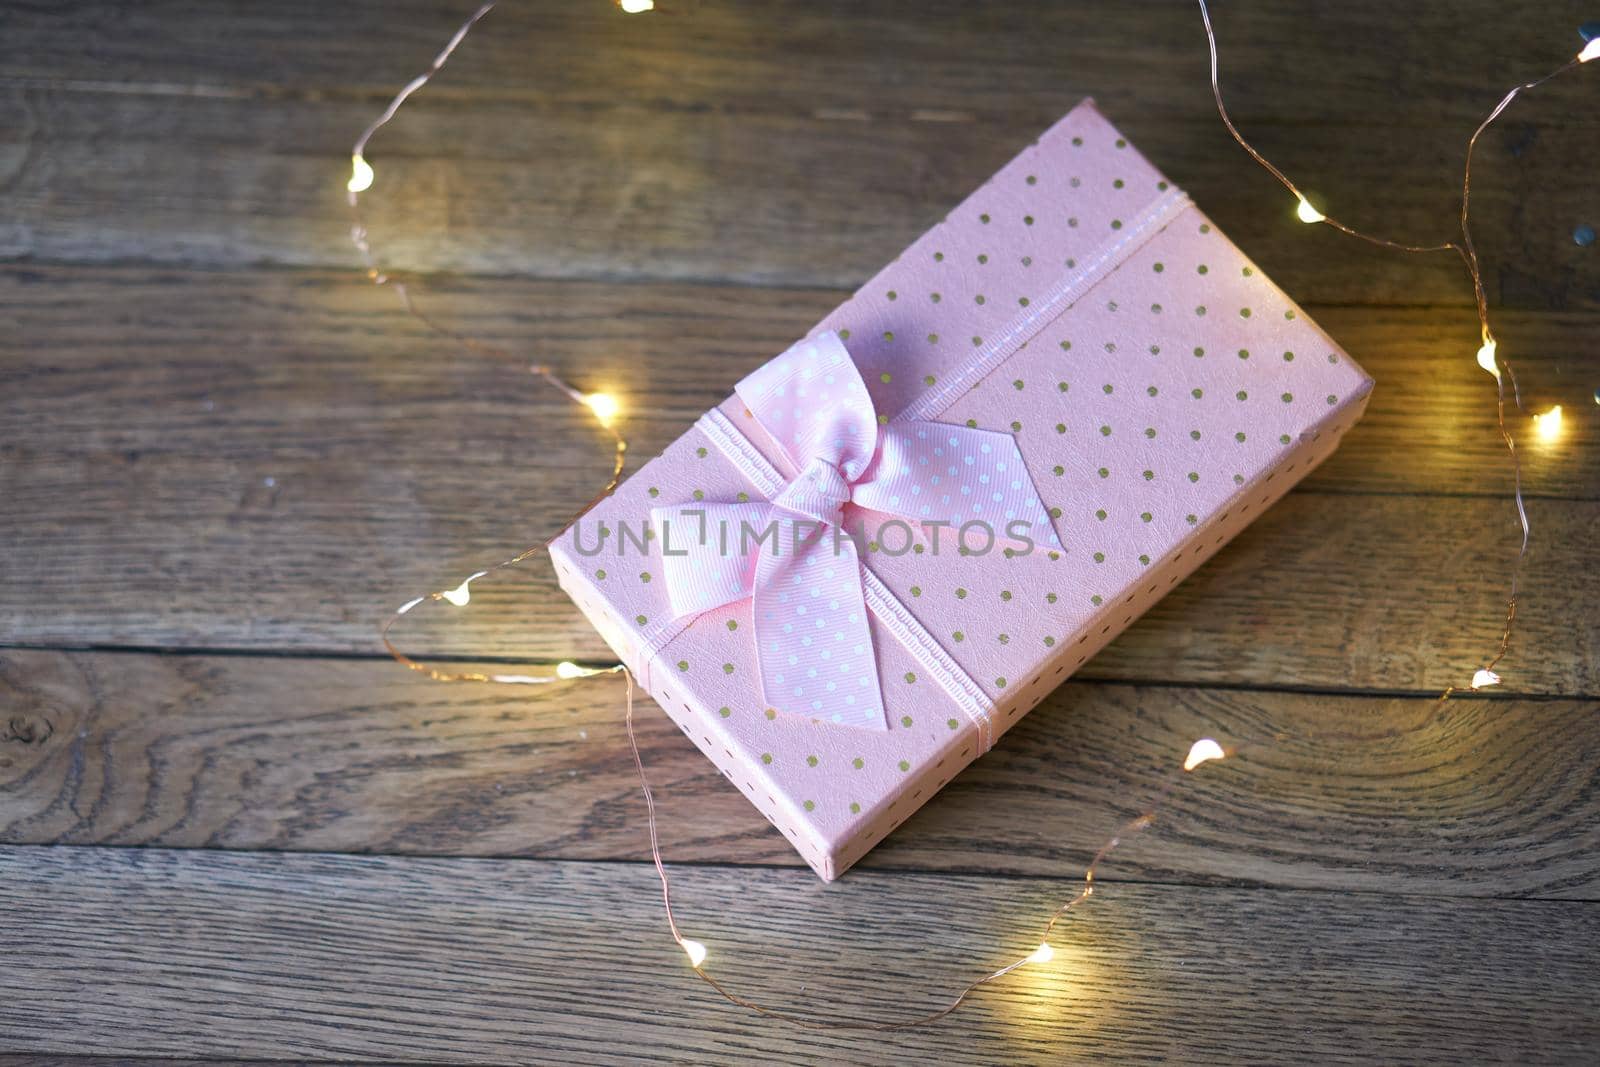 pink gift box garland decoration wooden background holiday. High quality photo